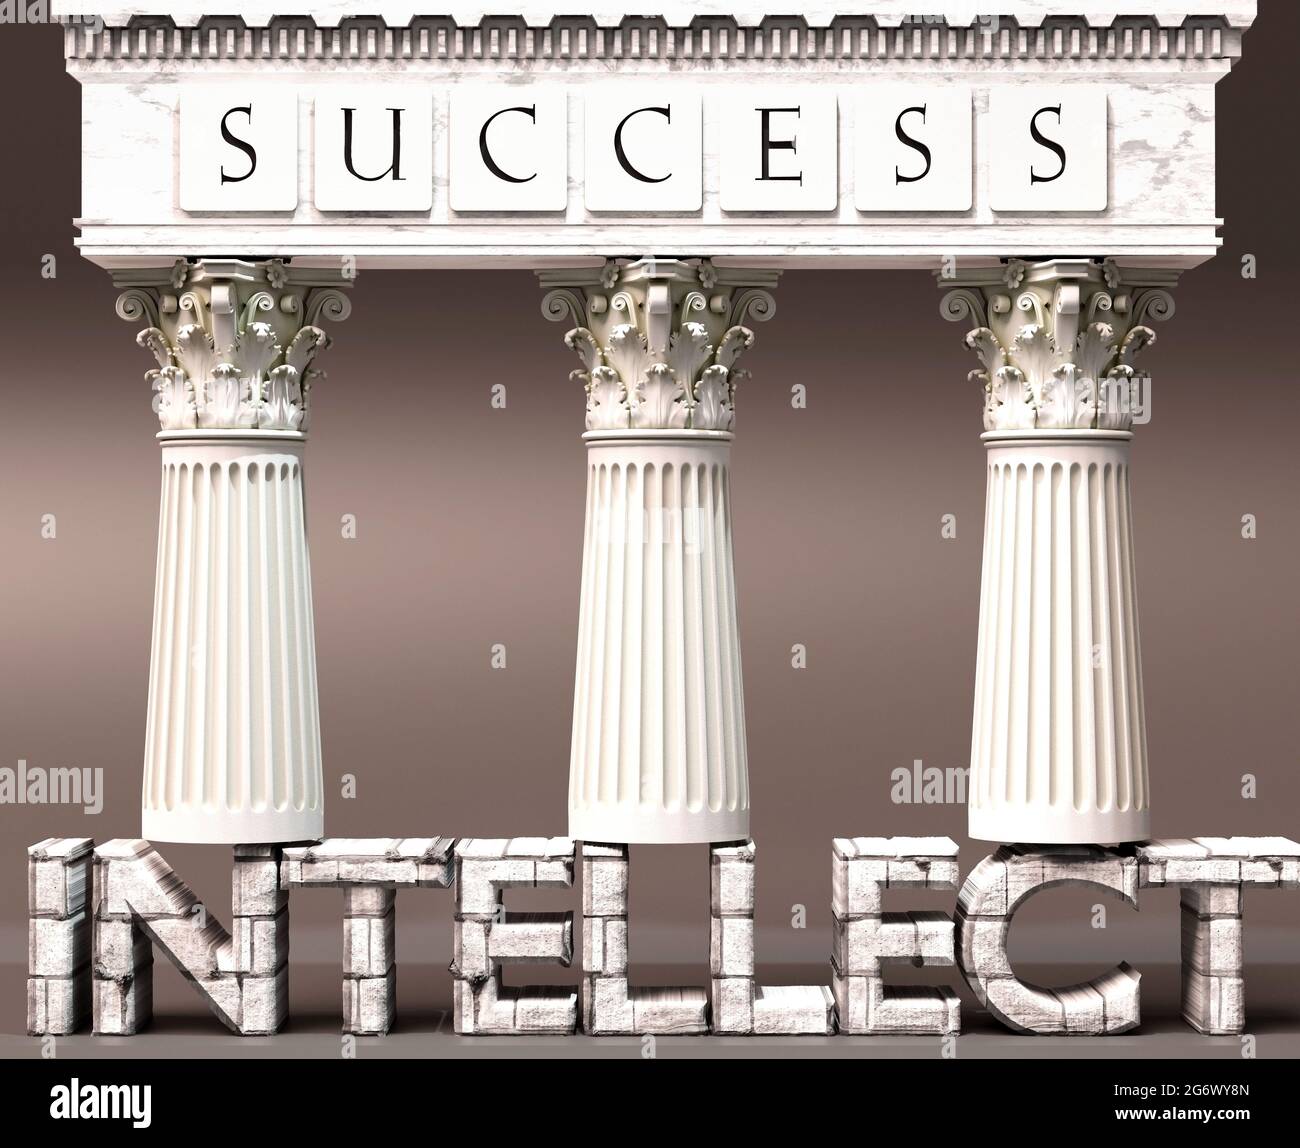 Intellect as a foundation of success - symbolized by pillars of success supported by Intellect to show that it is essential for reaching goals and ach Stock Photo